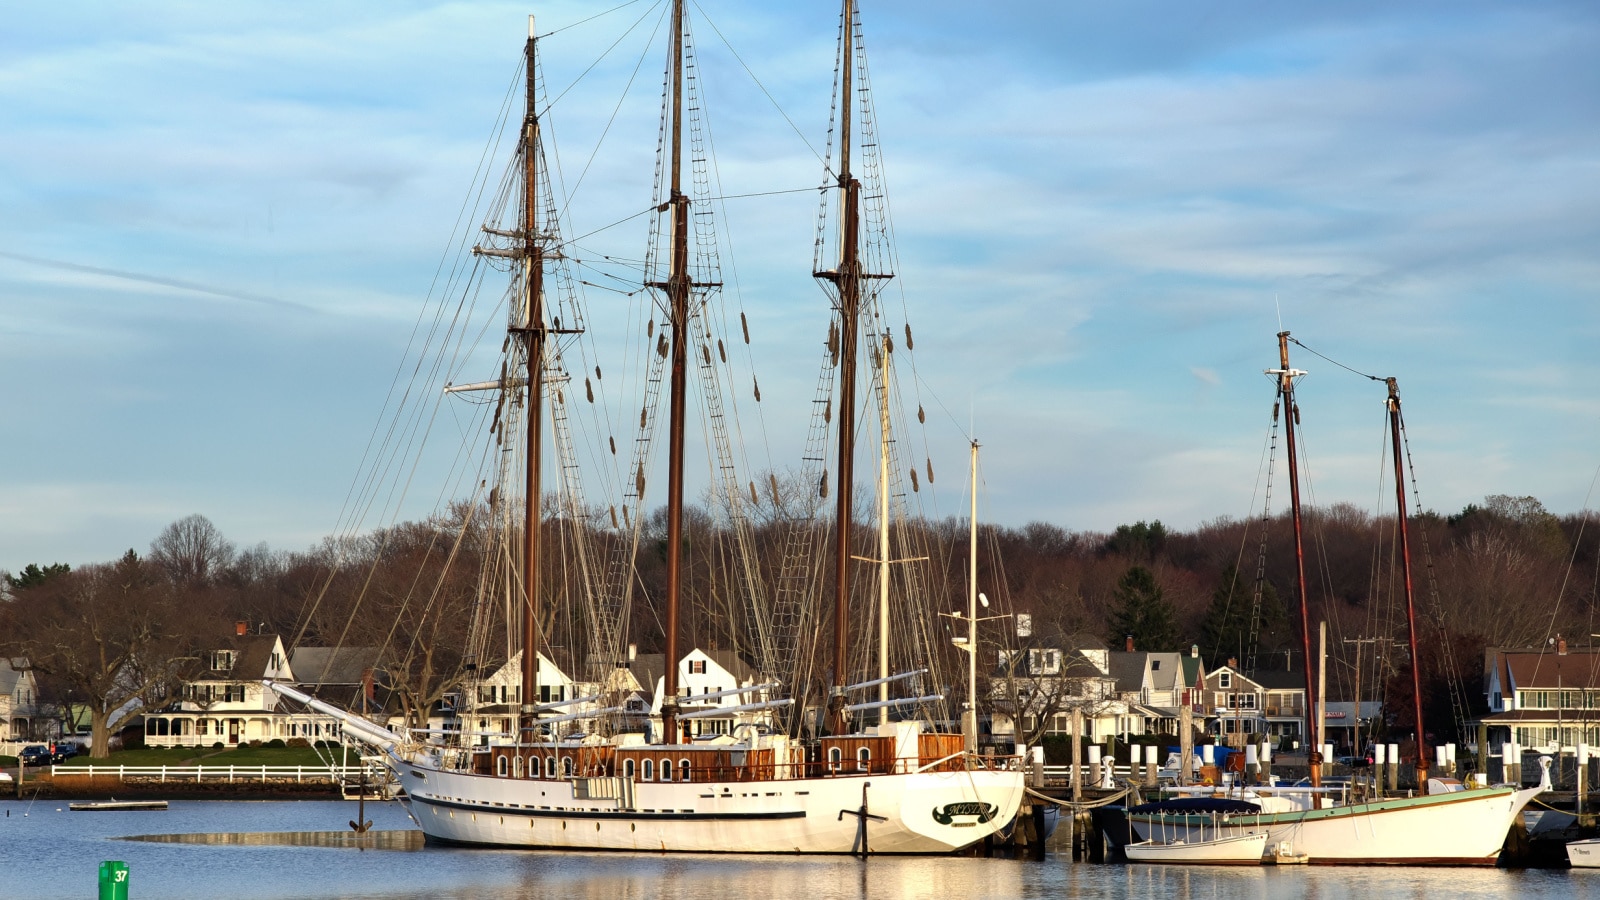 The Old Ship in Mystic Seaport